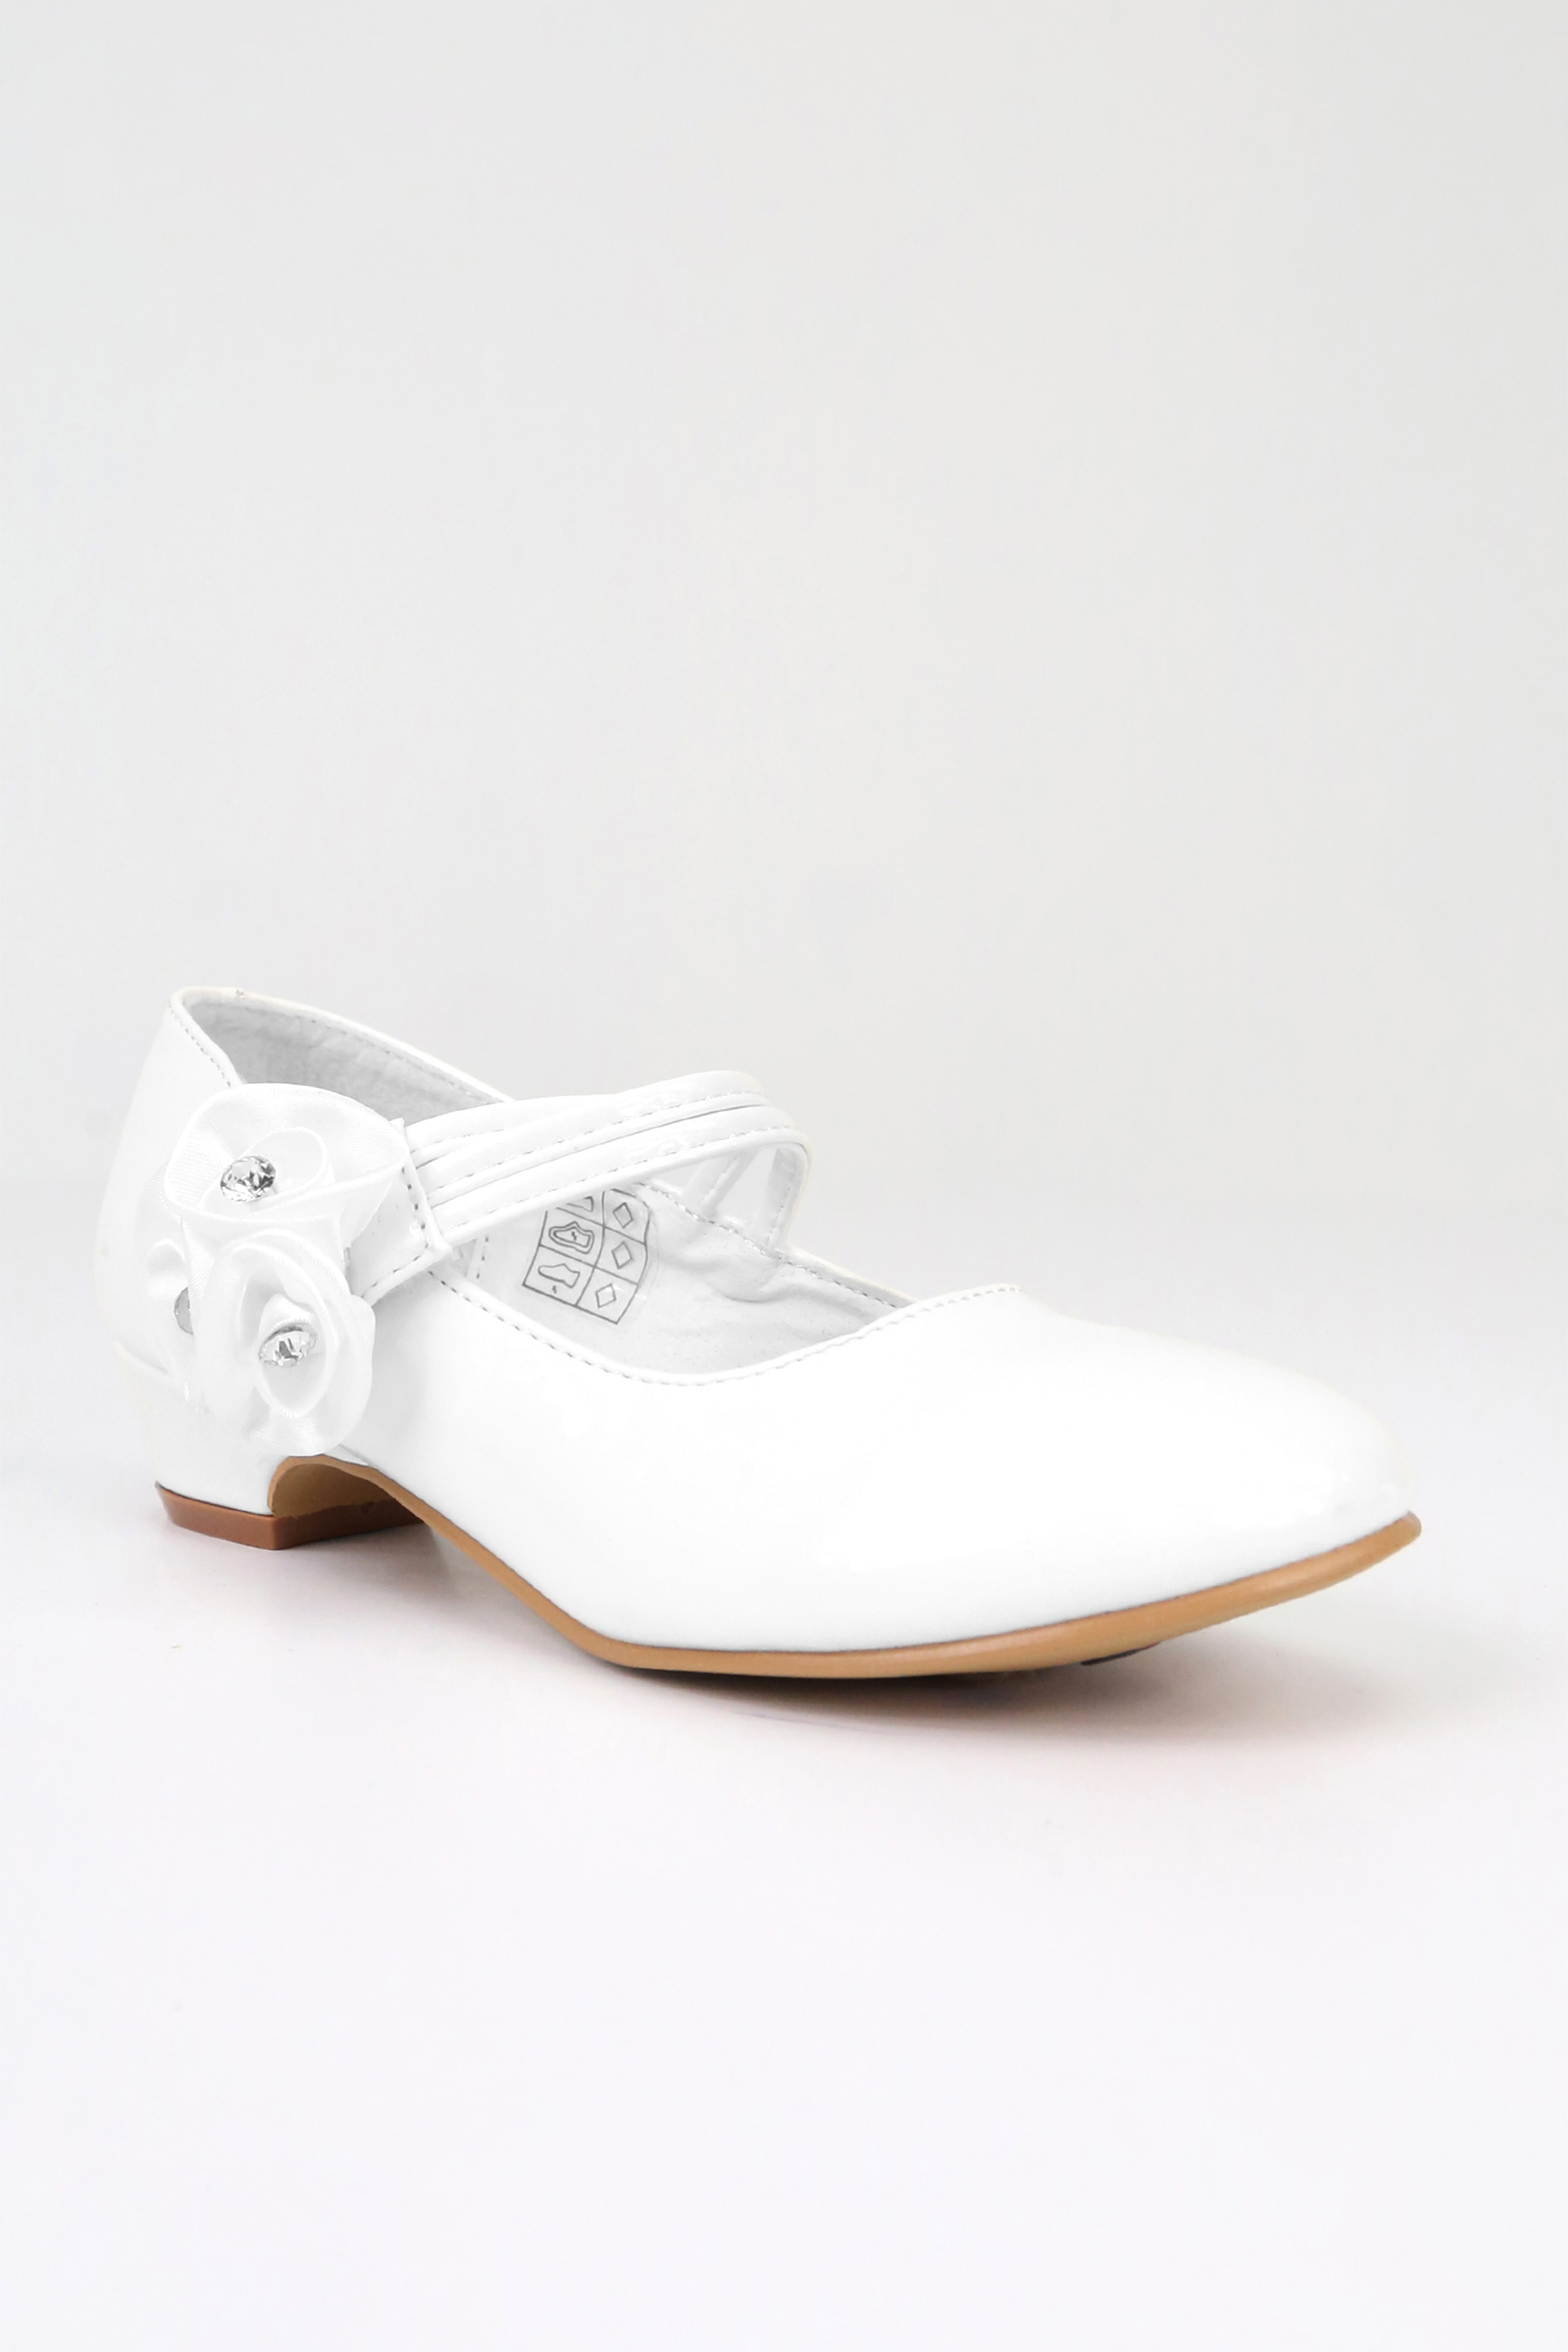 Girls' Mary Jane Low Heal Patent Dress shoes  - Blanc